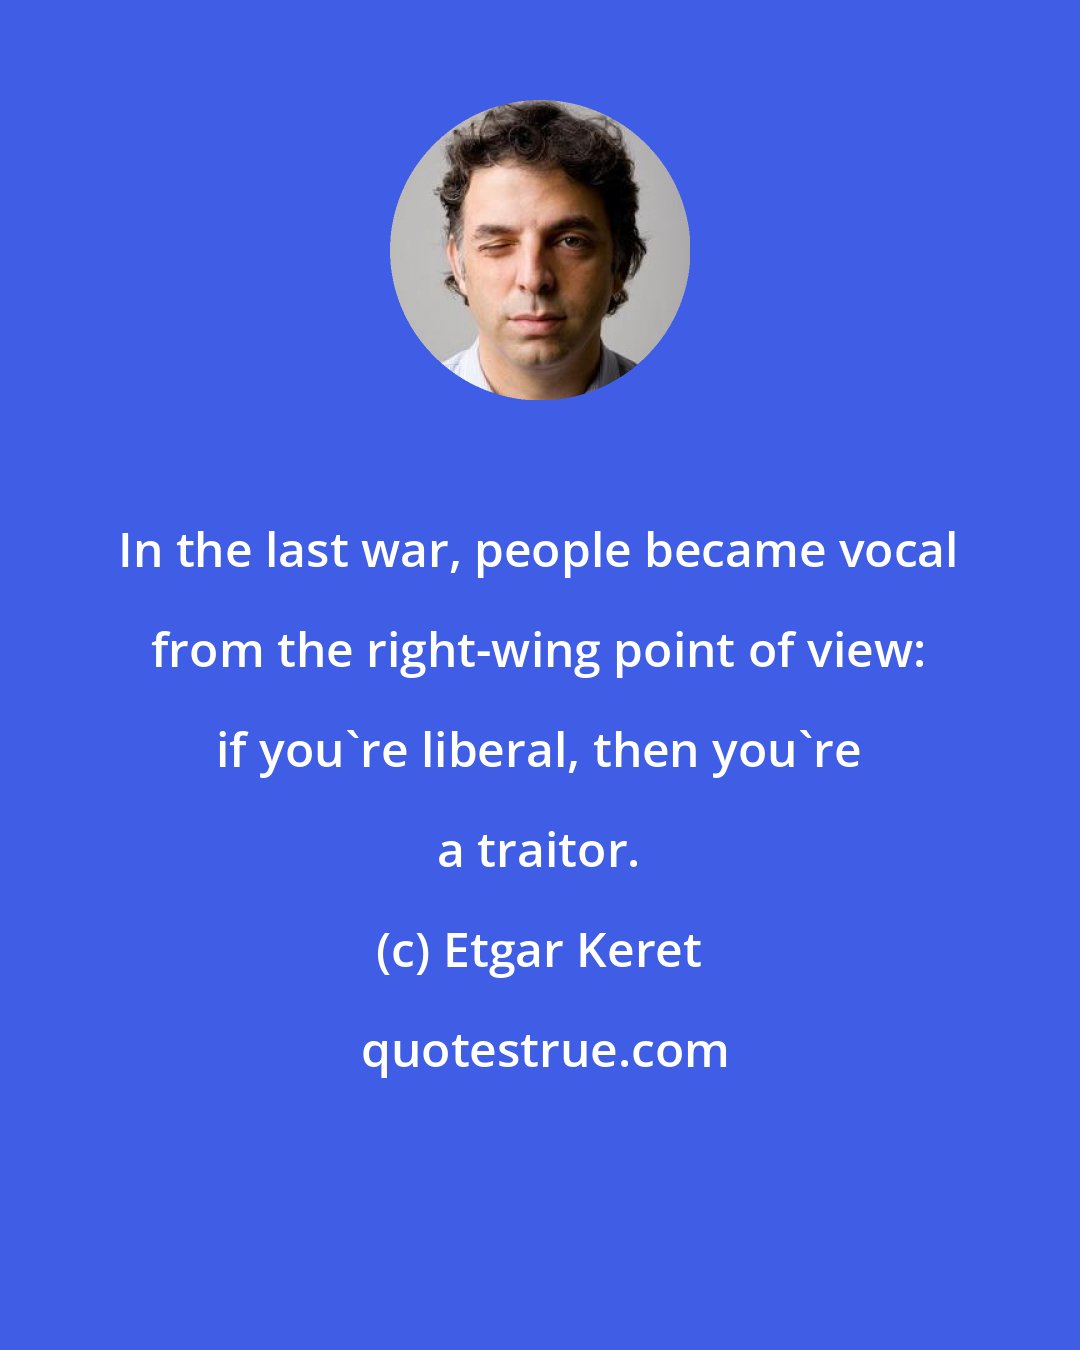 Etgar Keret: In the last war, people became vocal from the right-wing point of view: if you're liberal, then you're a traitor.